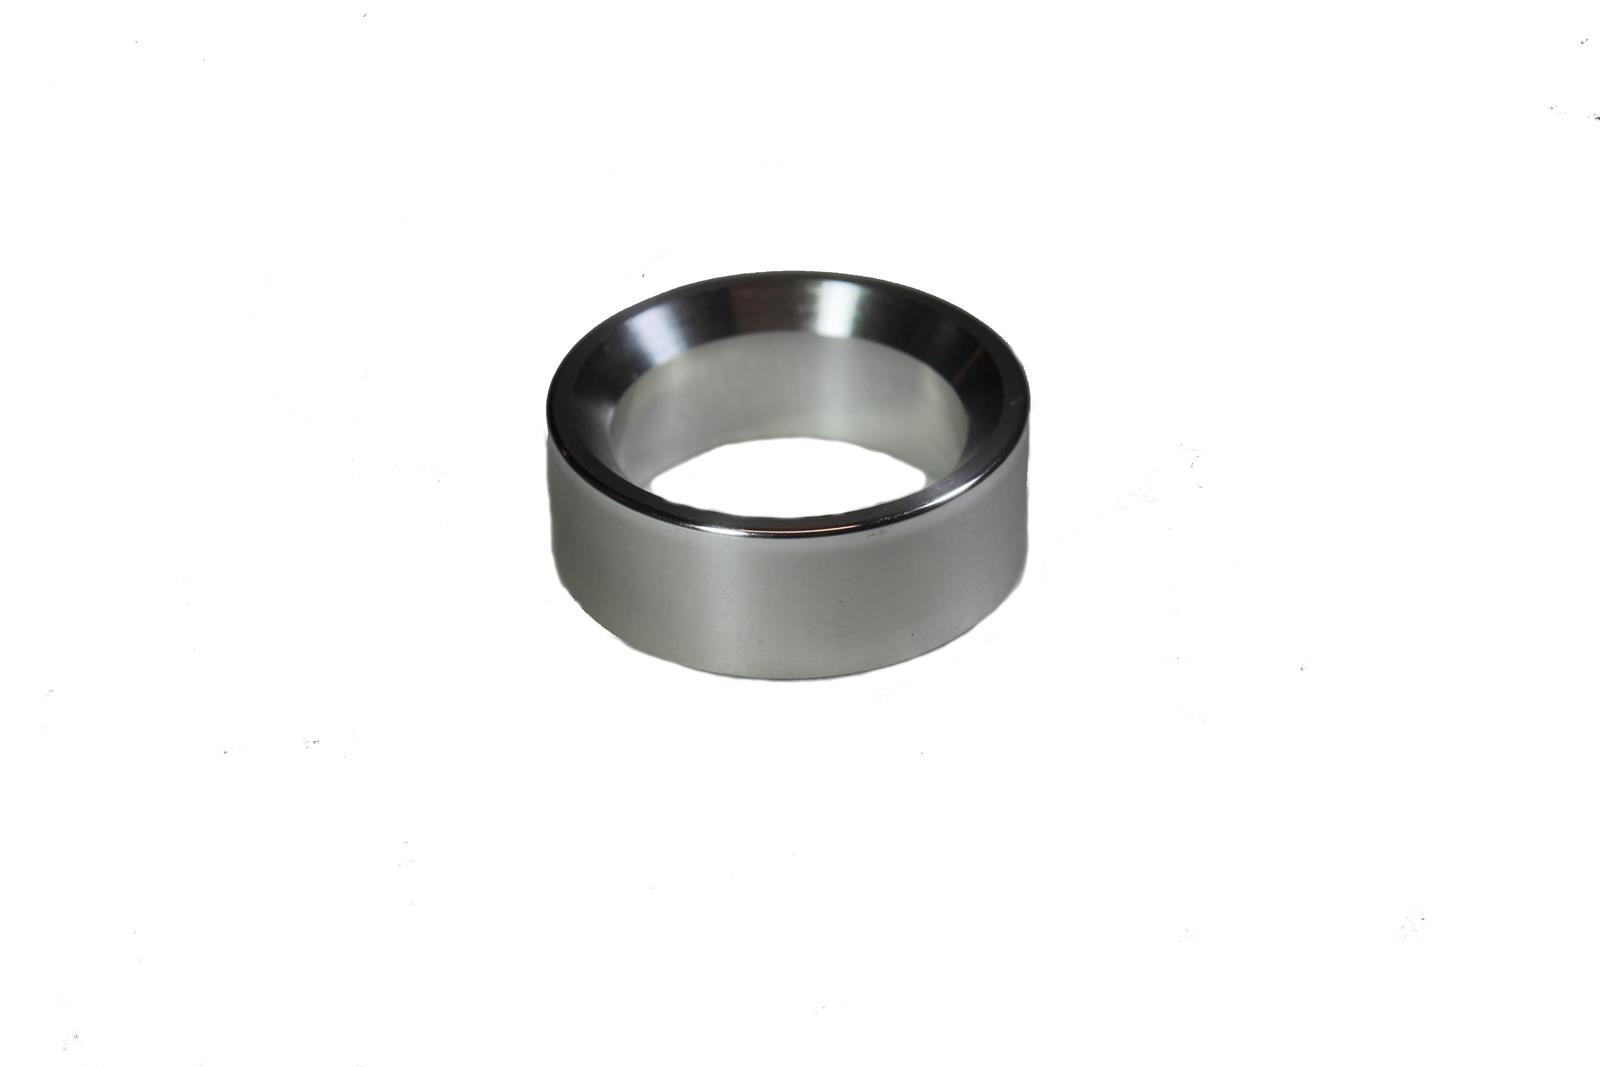 mcleod adjustable throw out bearing